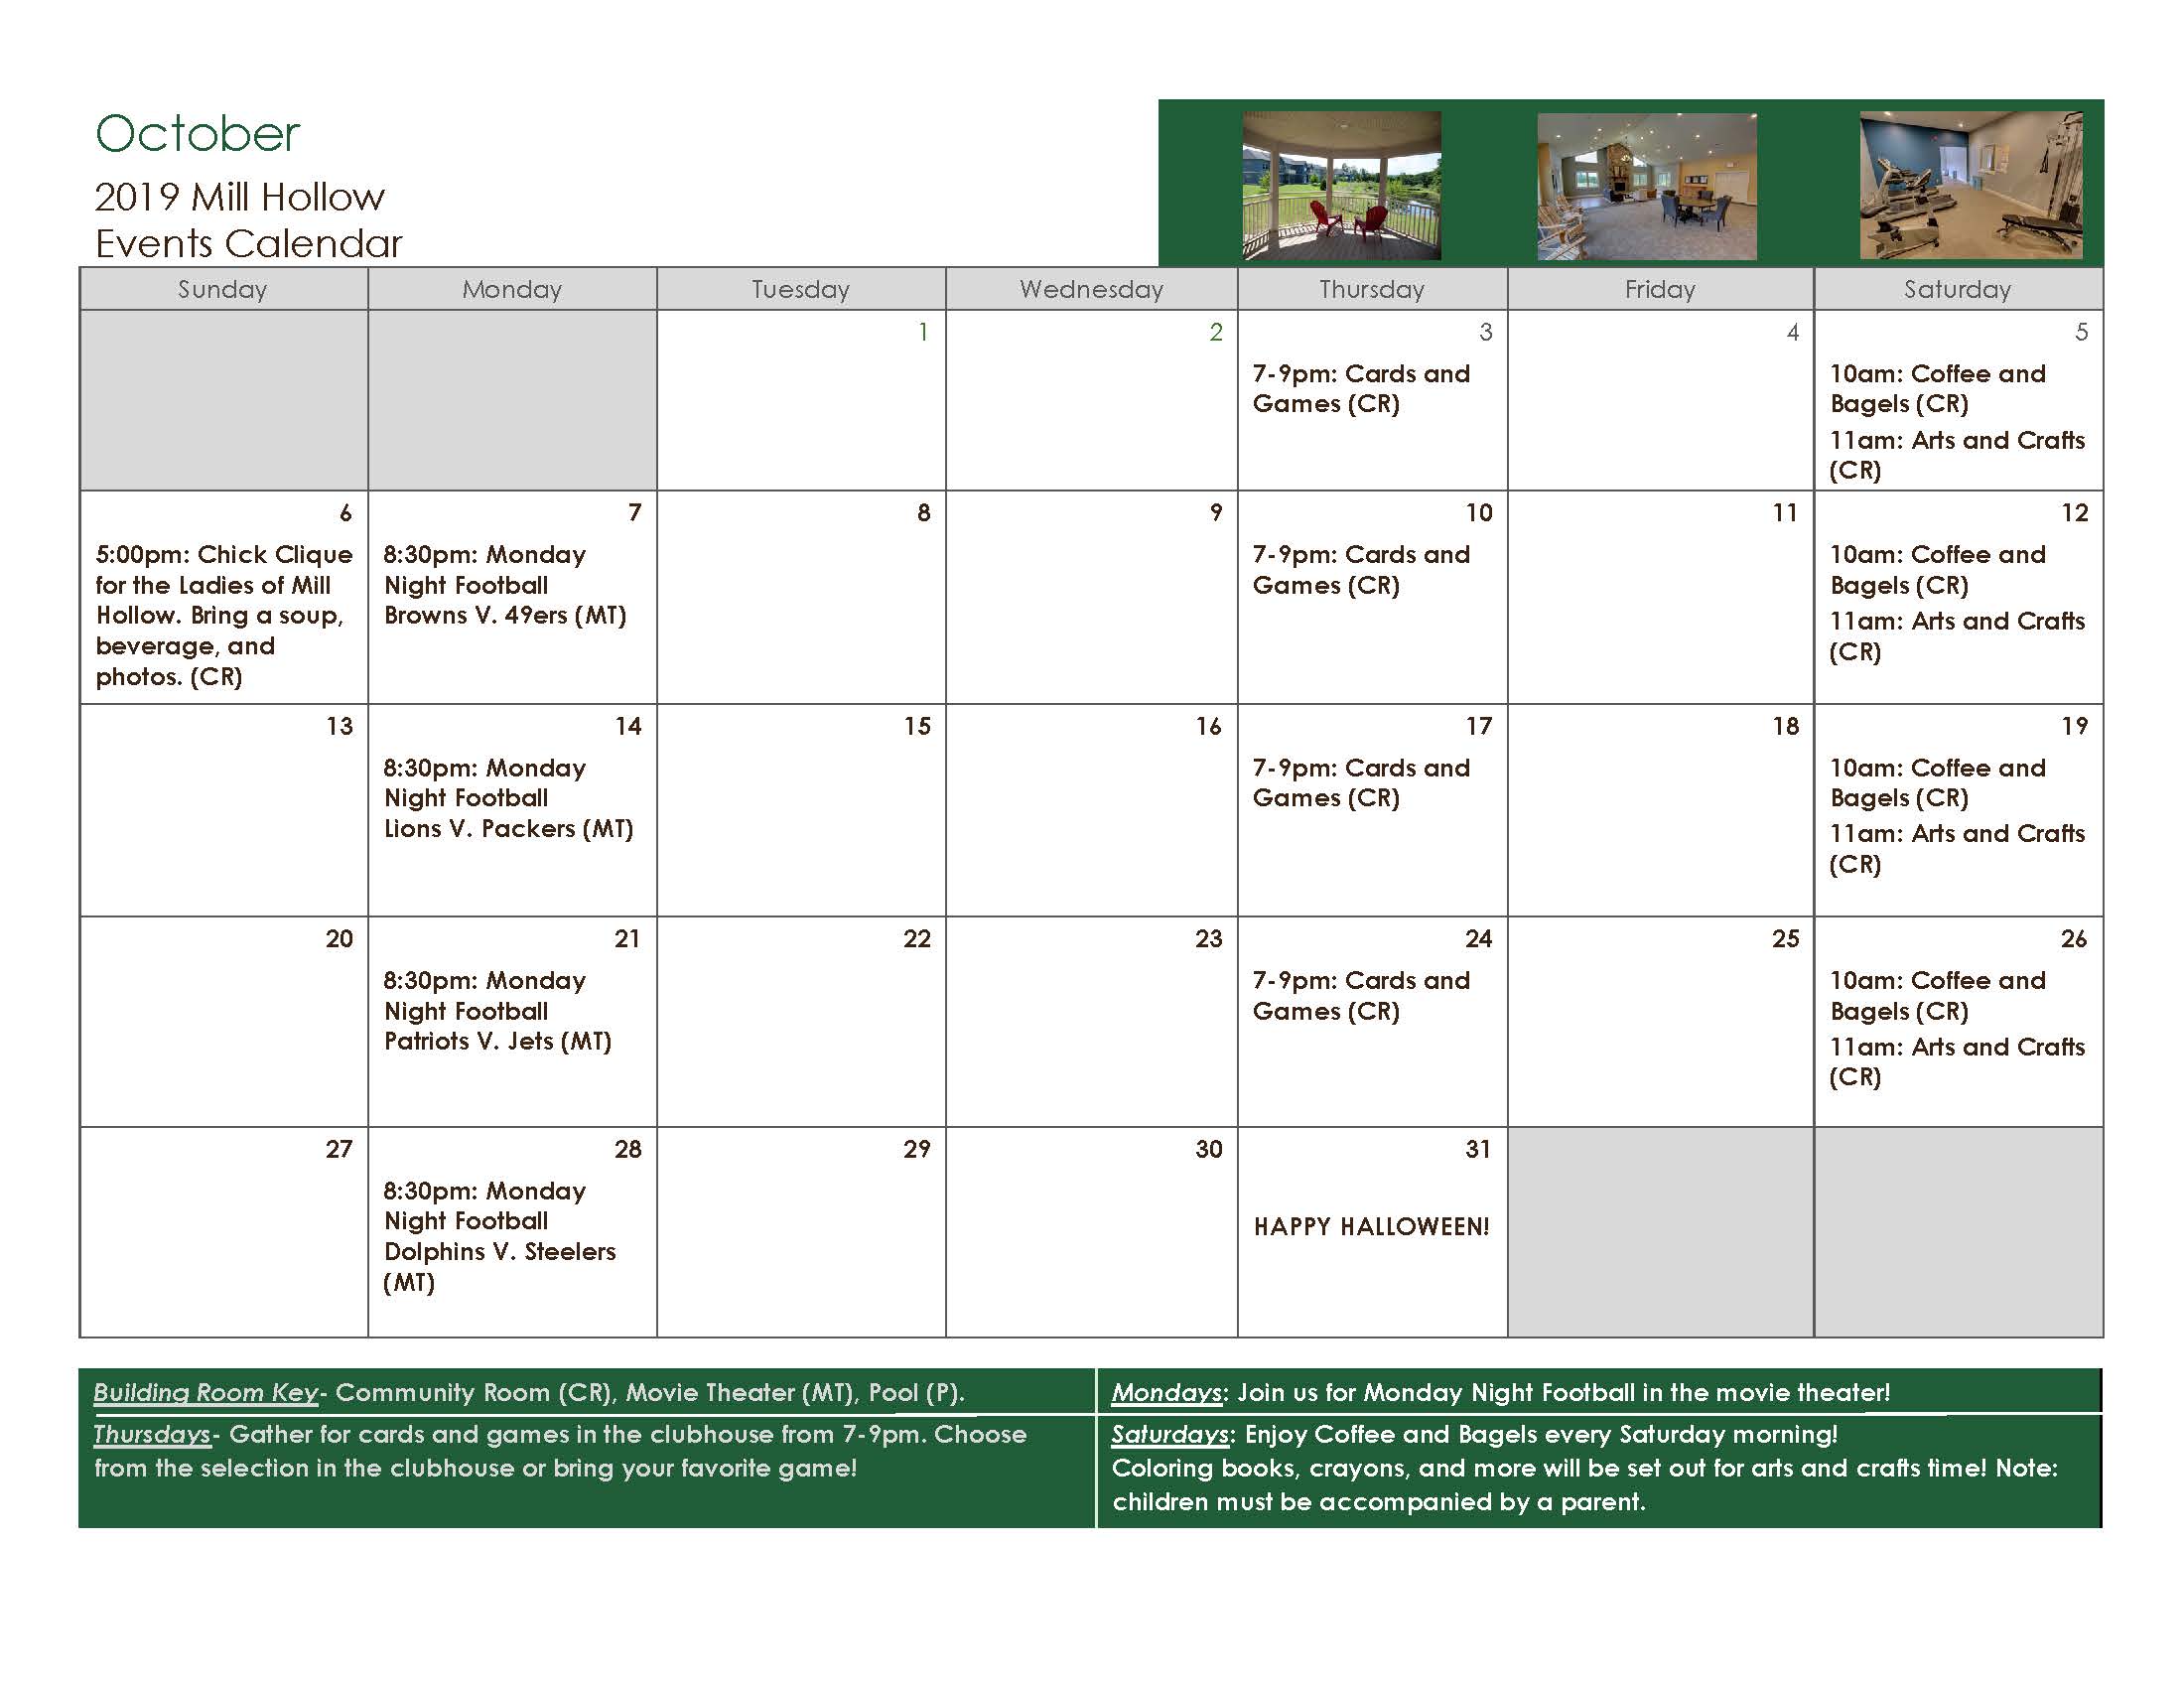 Mill Hollow October Events Calendar Sunrise Management and Consulting